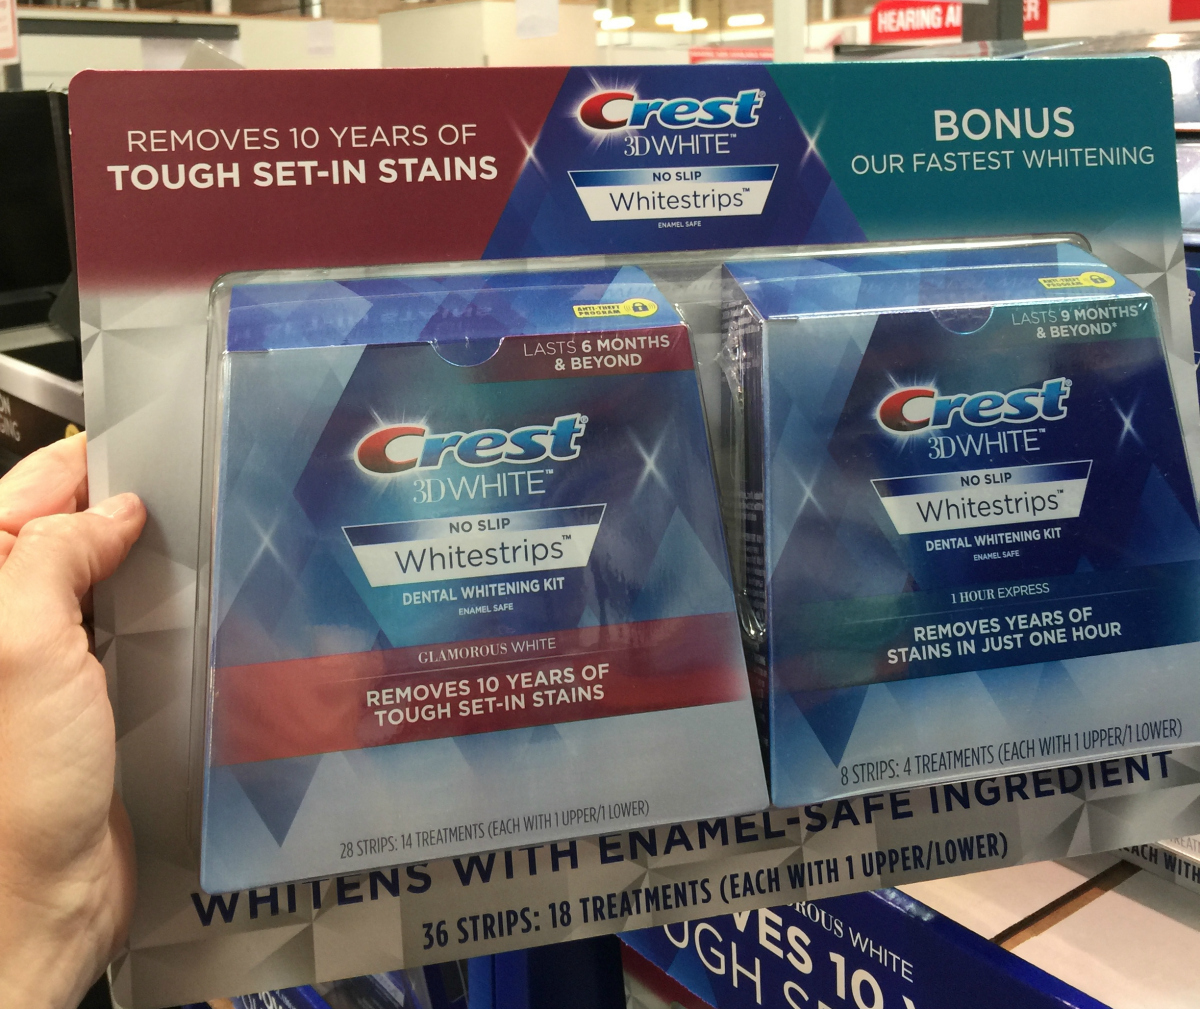 Crest 3D Whitestrips at Costco